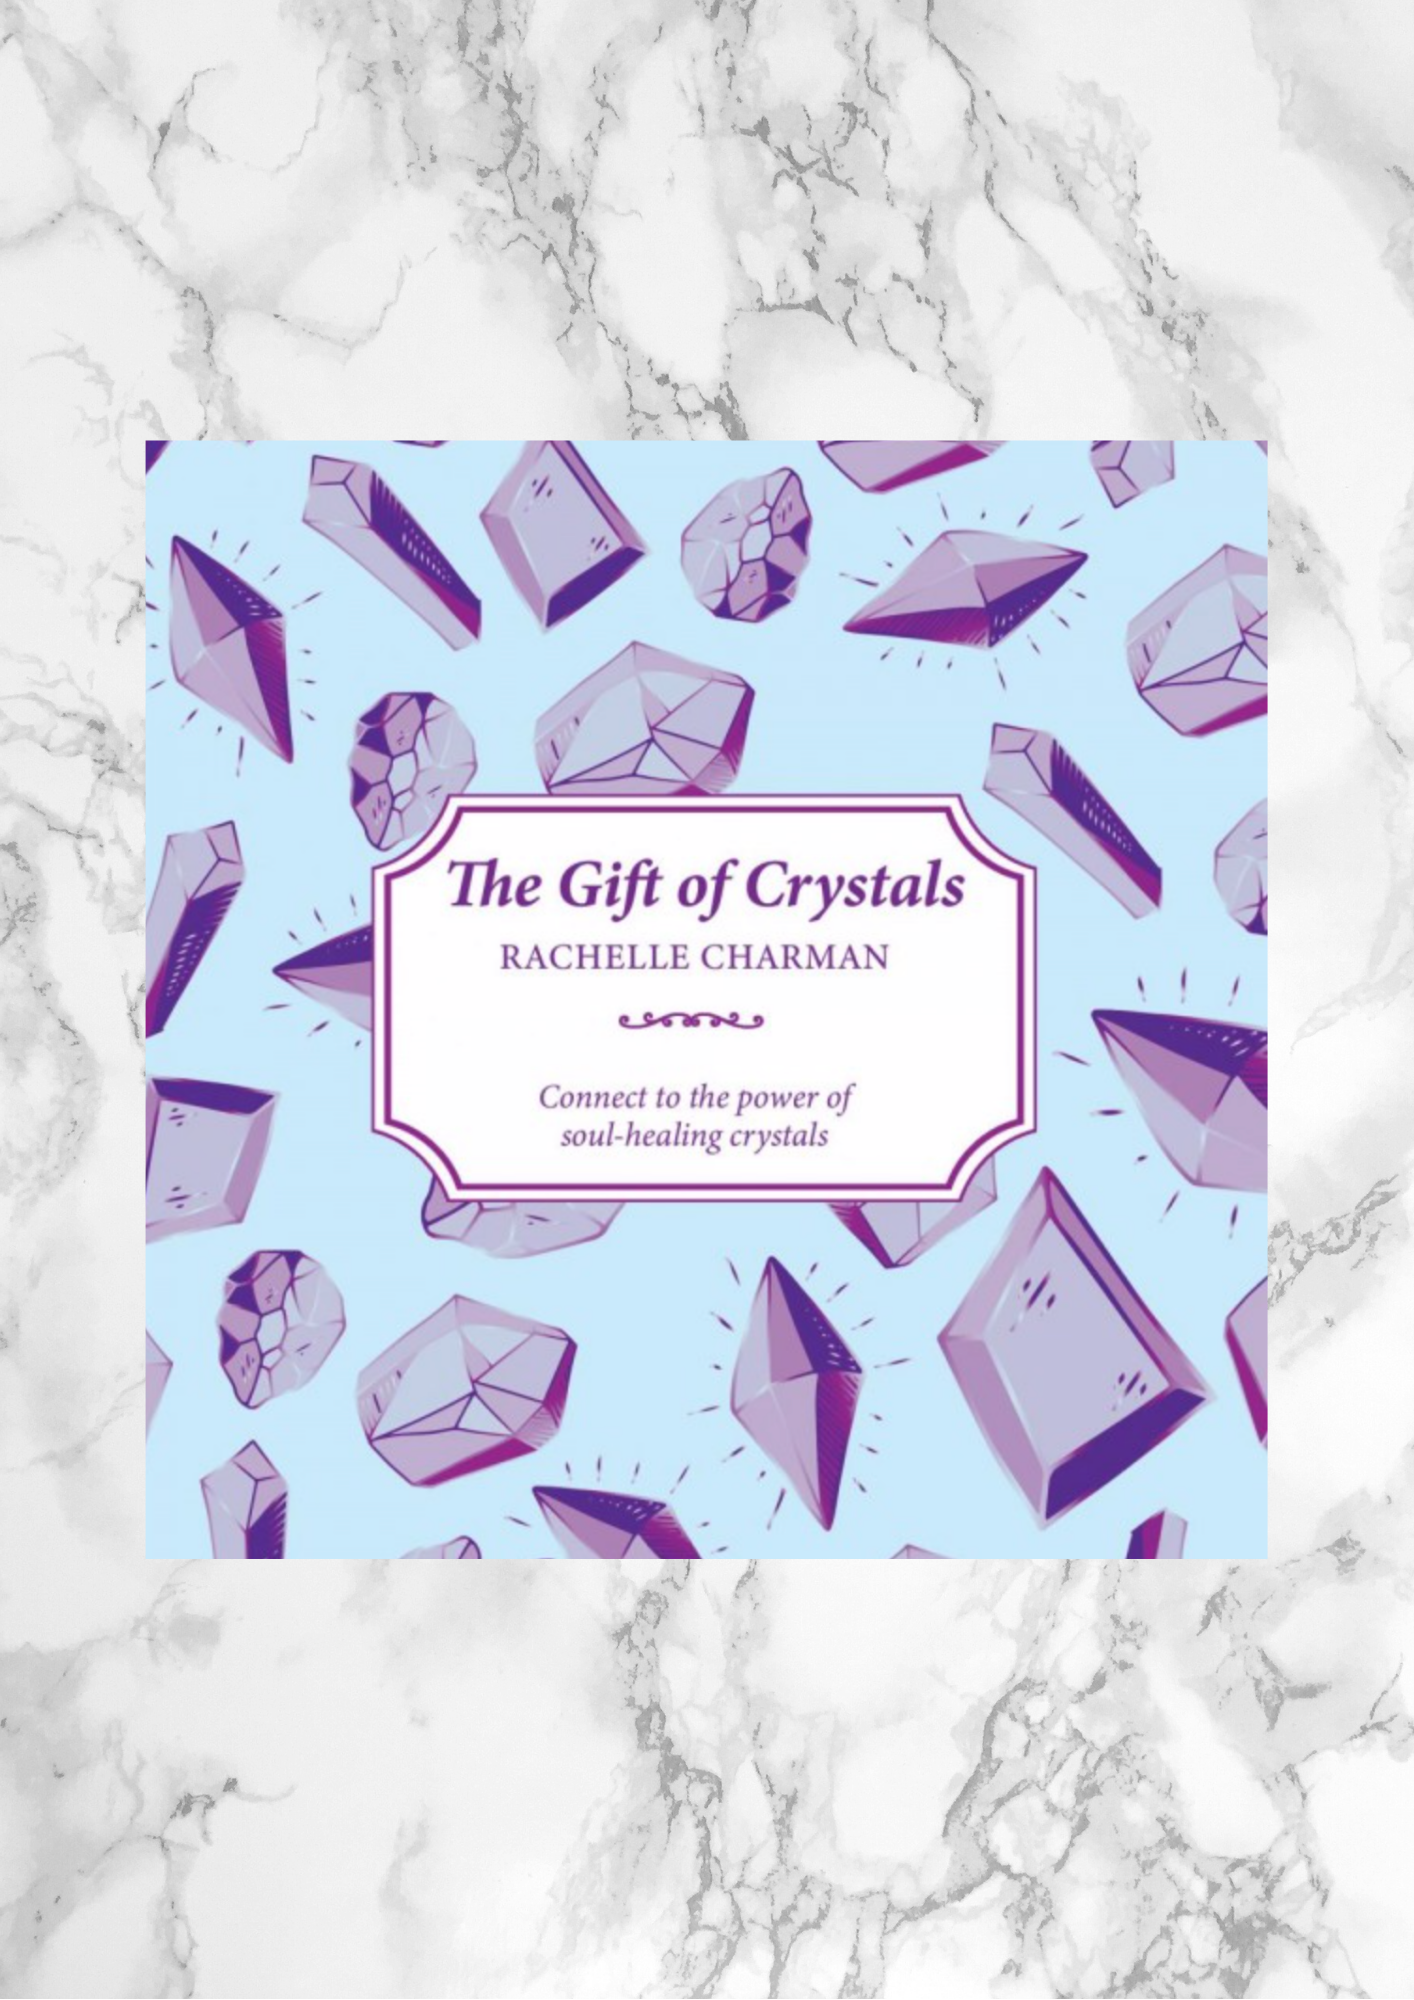 The Gift of Crystals